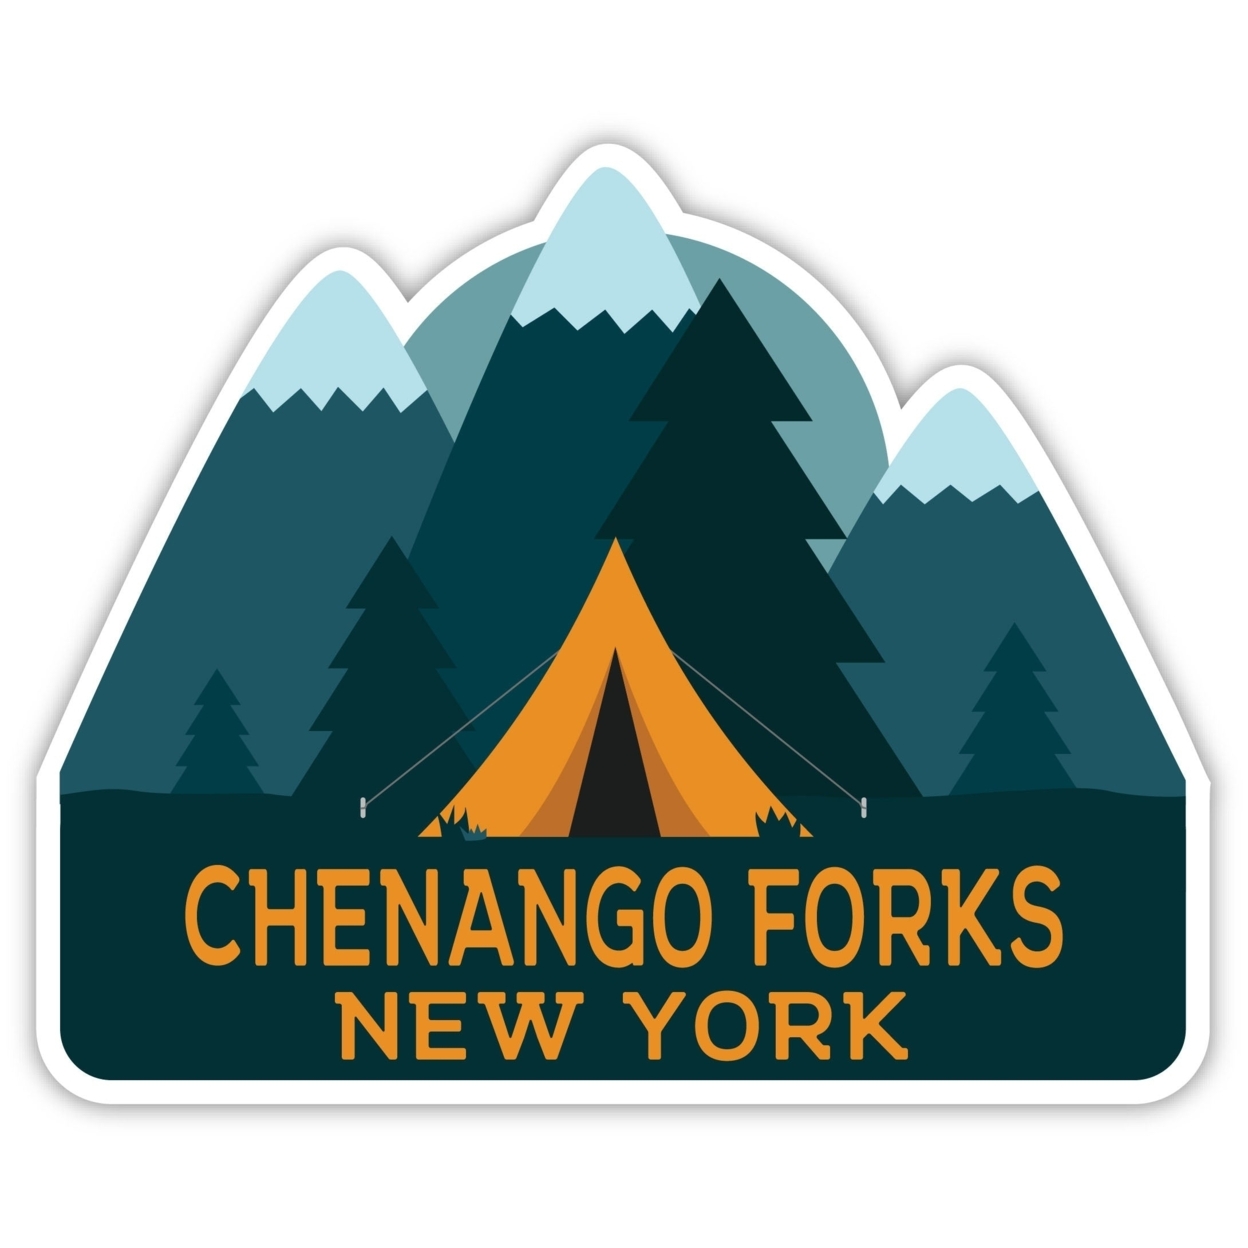 Chenango Forks New York Souvenir Decorative Stickers (Choose Theme And Size) - 4-Pack, 4-Inch, Tent